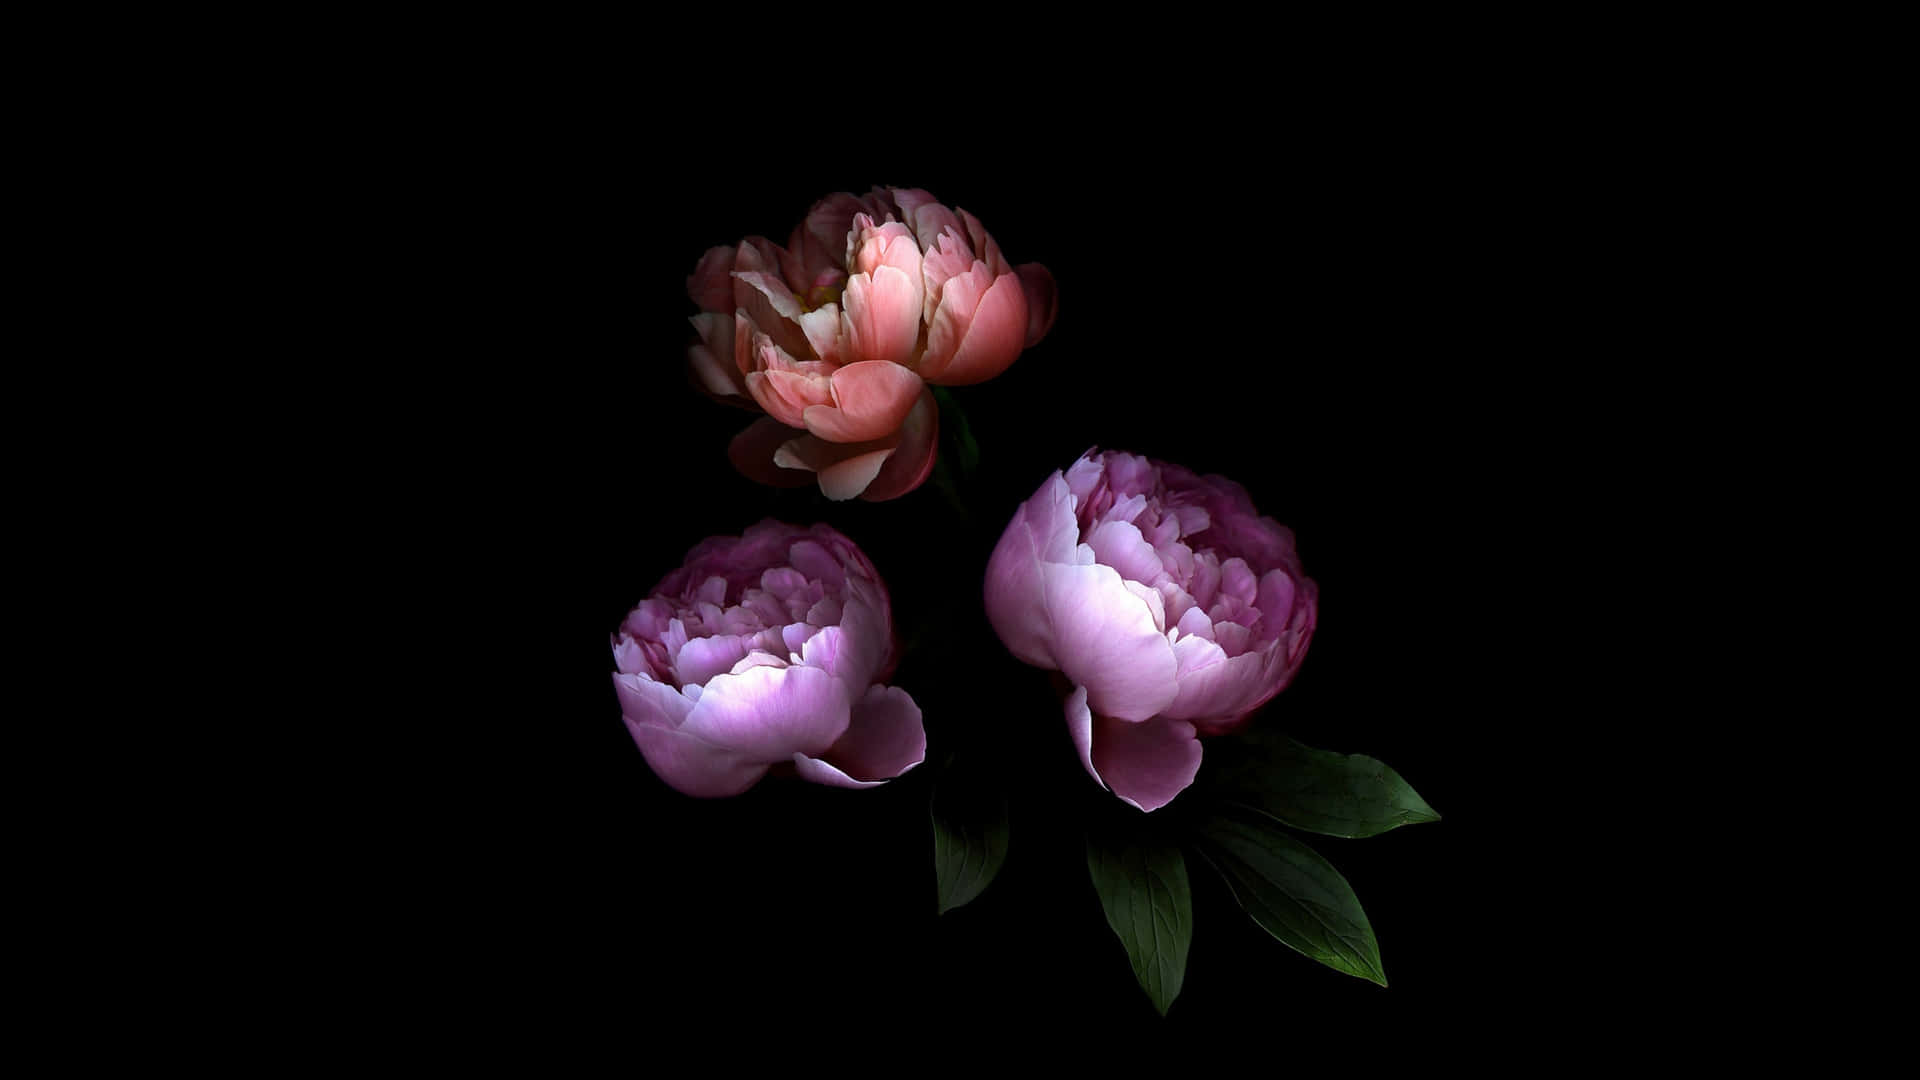 Three Pink Flowers On A Black Background